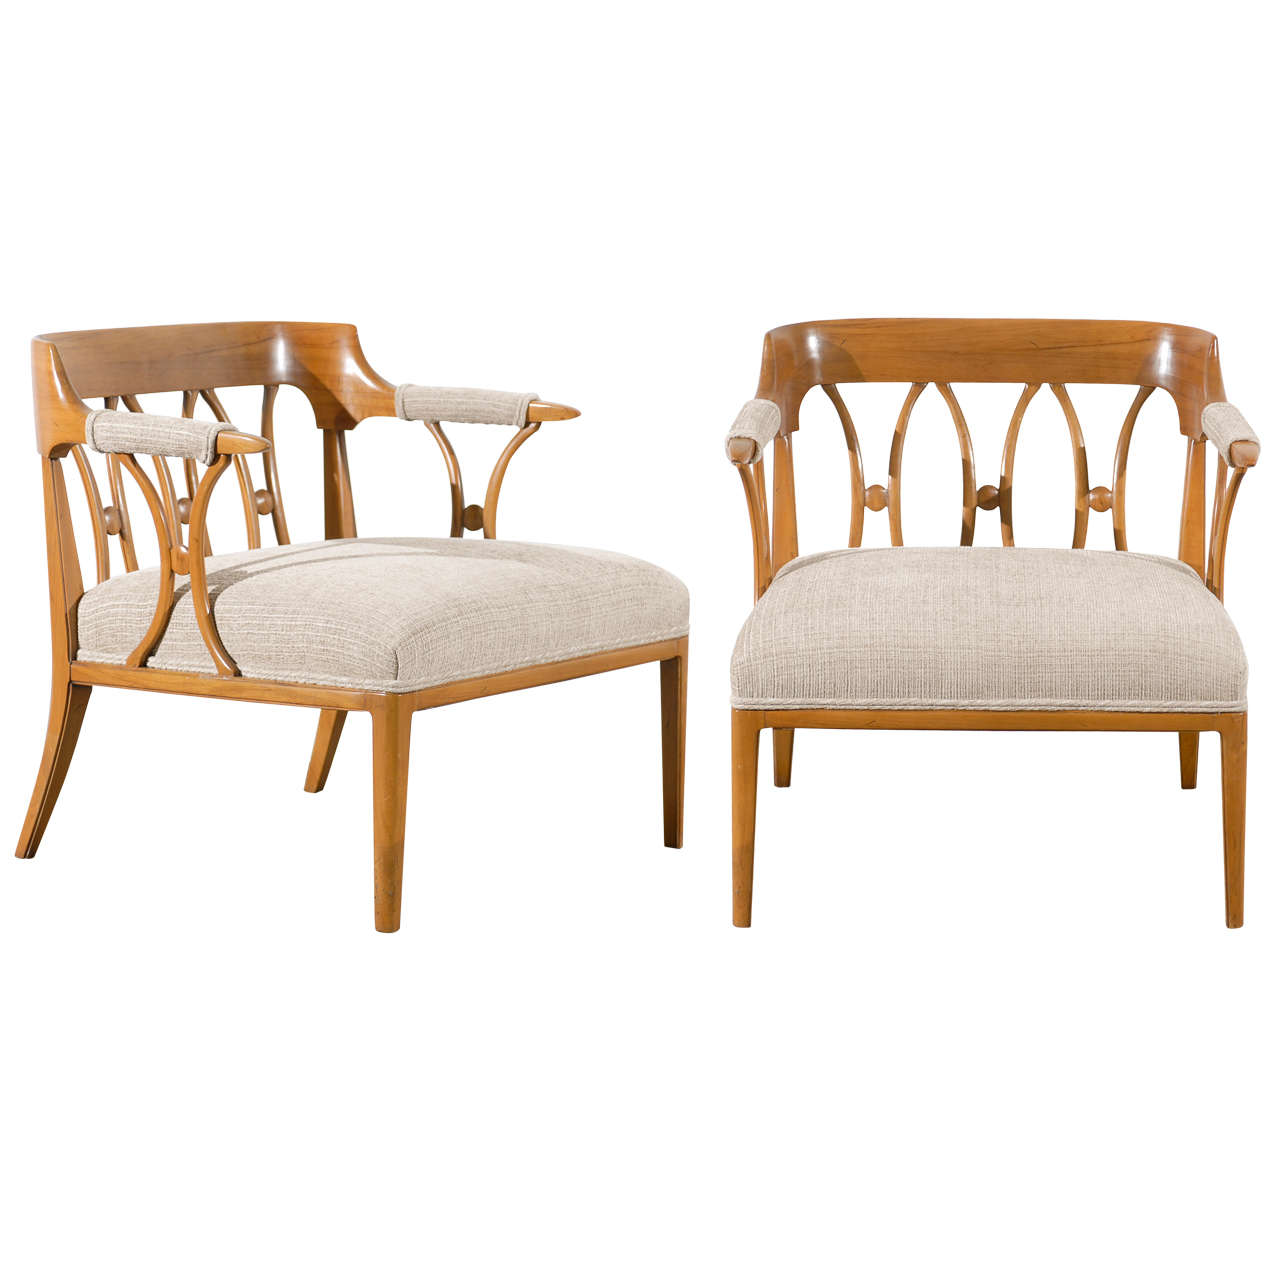 Beautiful Pair of Tomlinson "Sophistcate" Lounge/Club Chairs